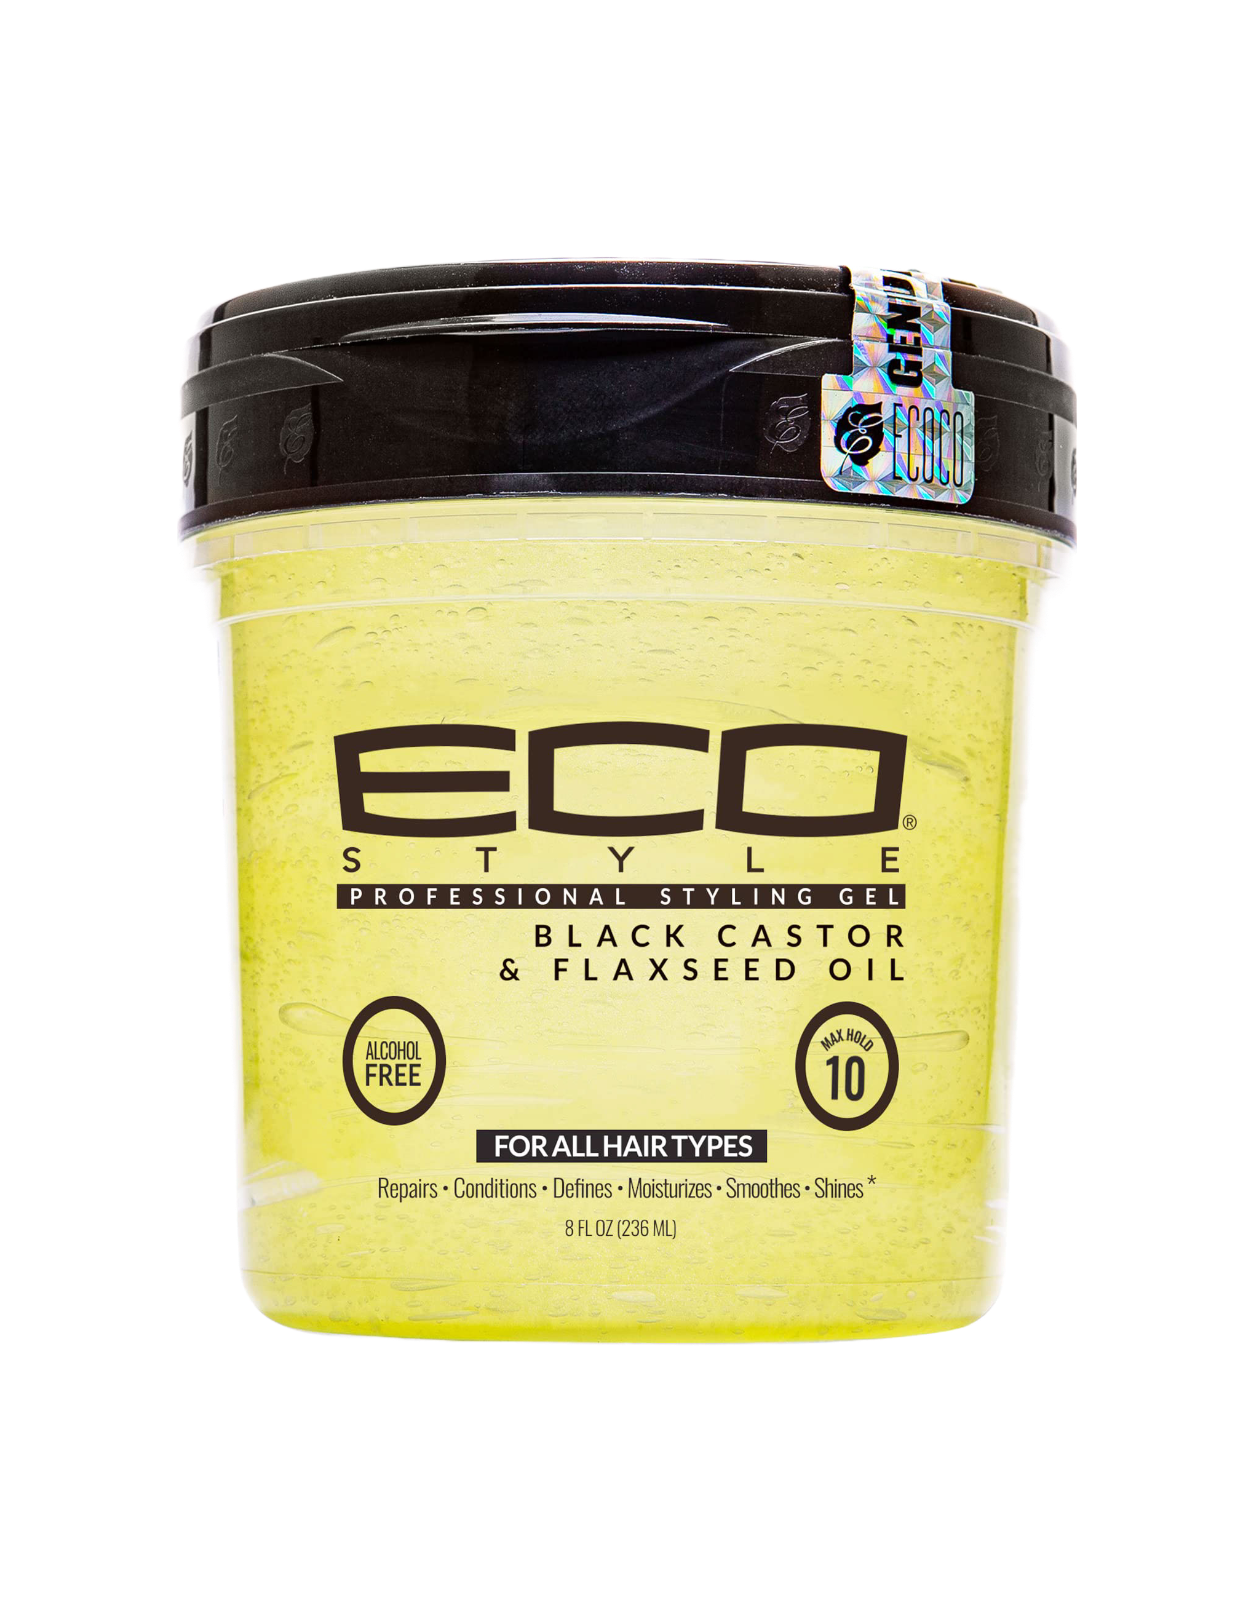 ECO - Black Castor & Flaxseed Oil Styling Gel